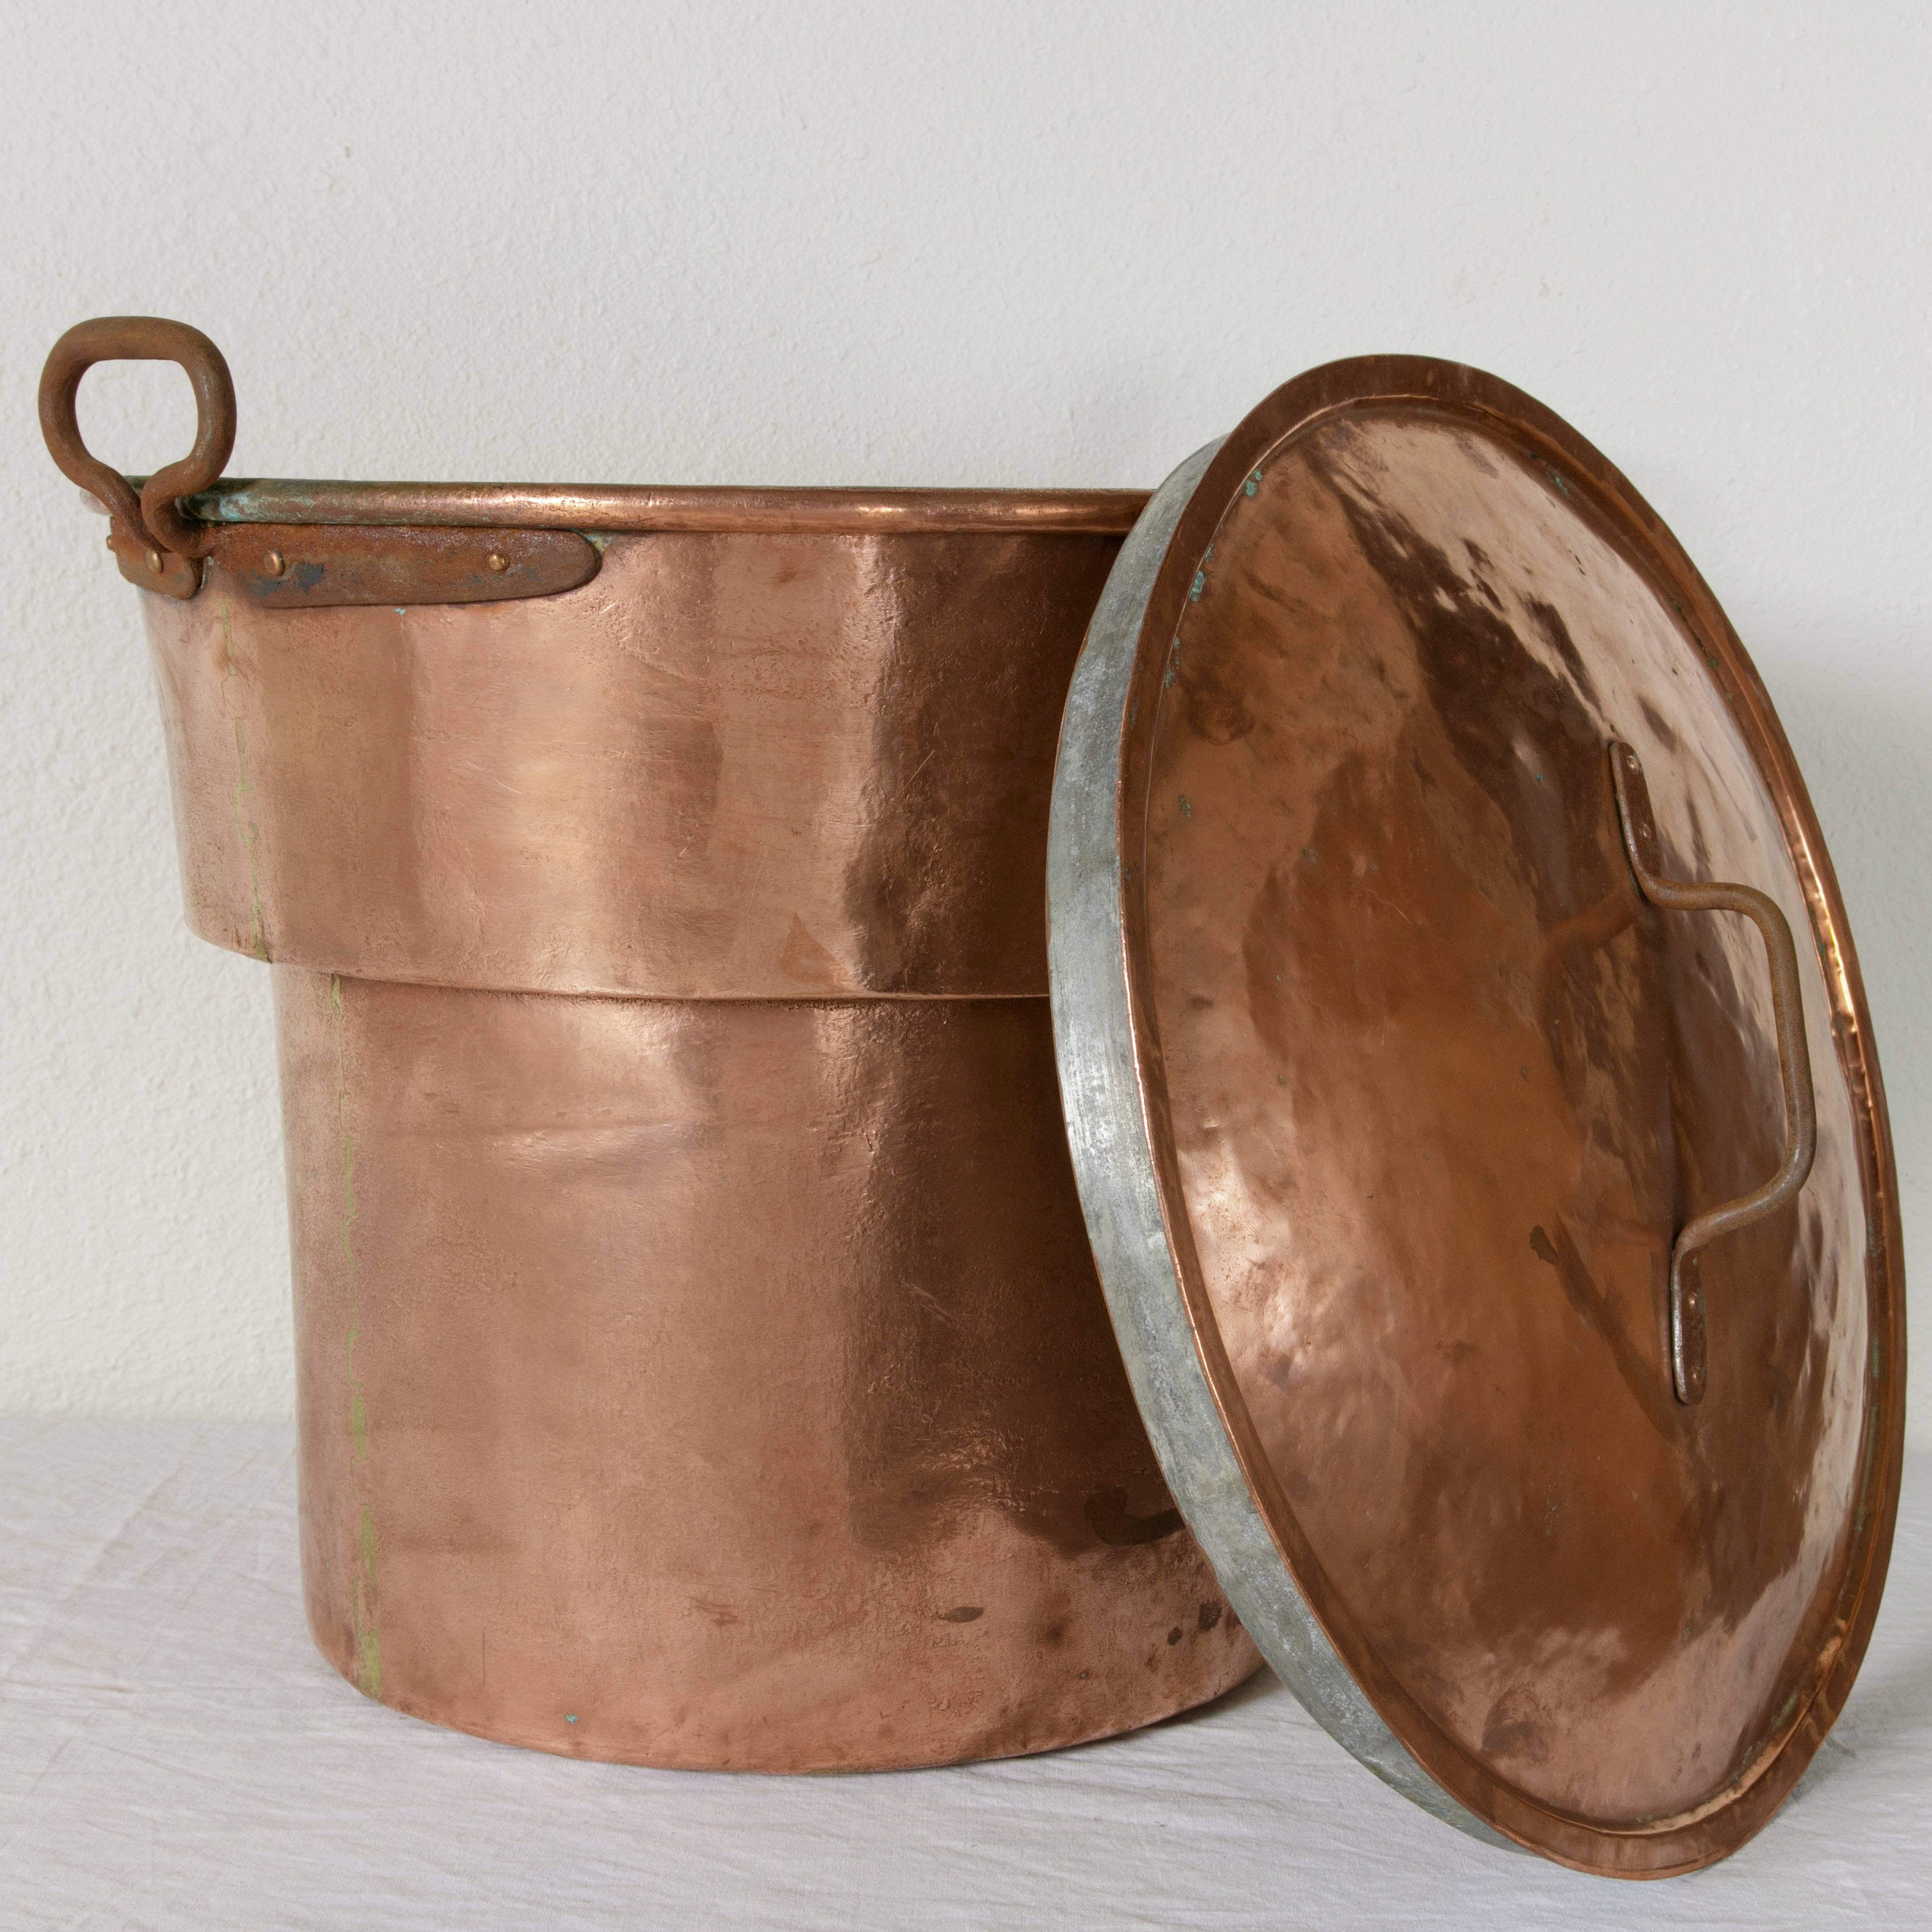 Very Large 19th Century French Copper Stock Pot or Cauldron with Lid 1